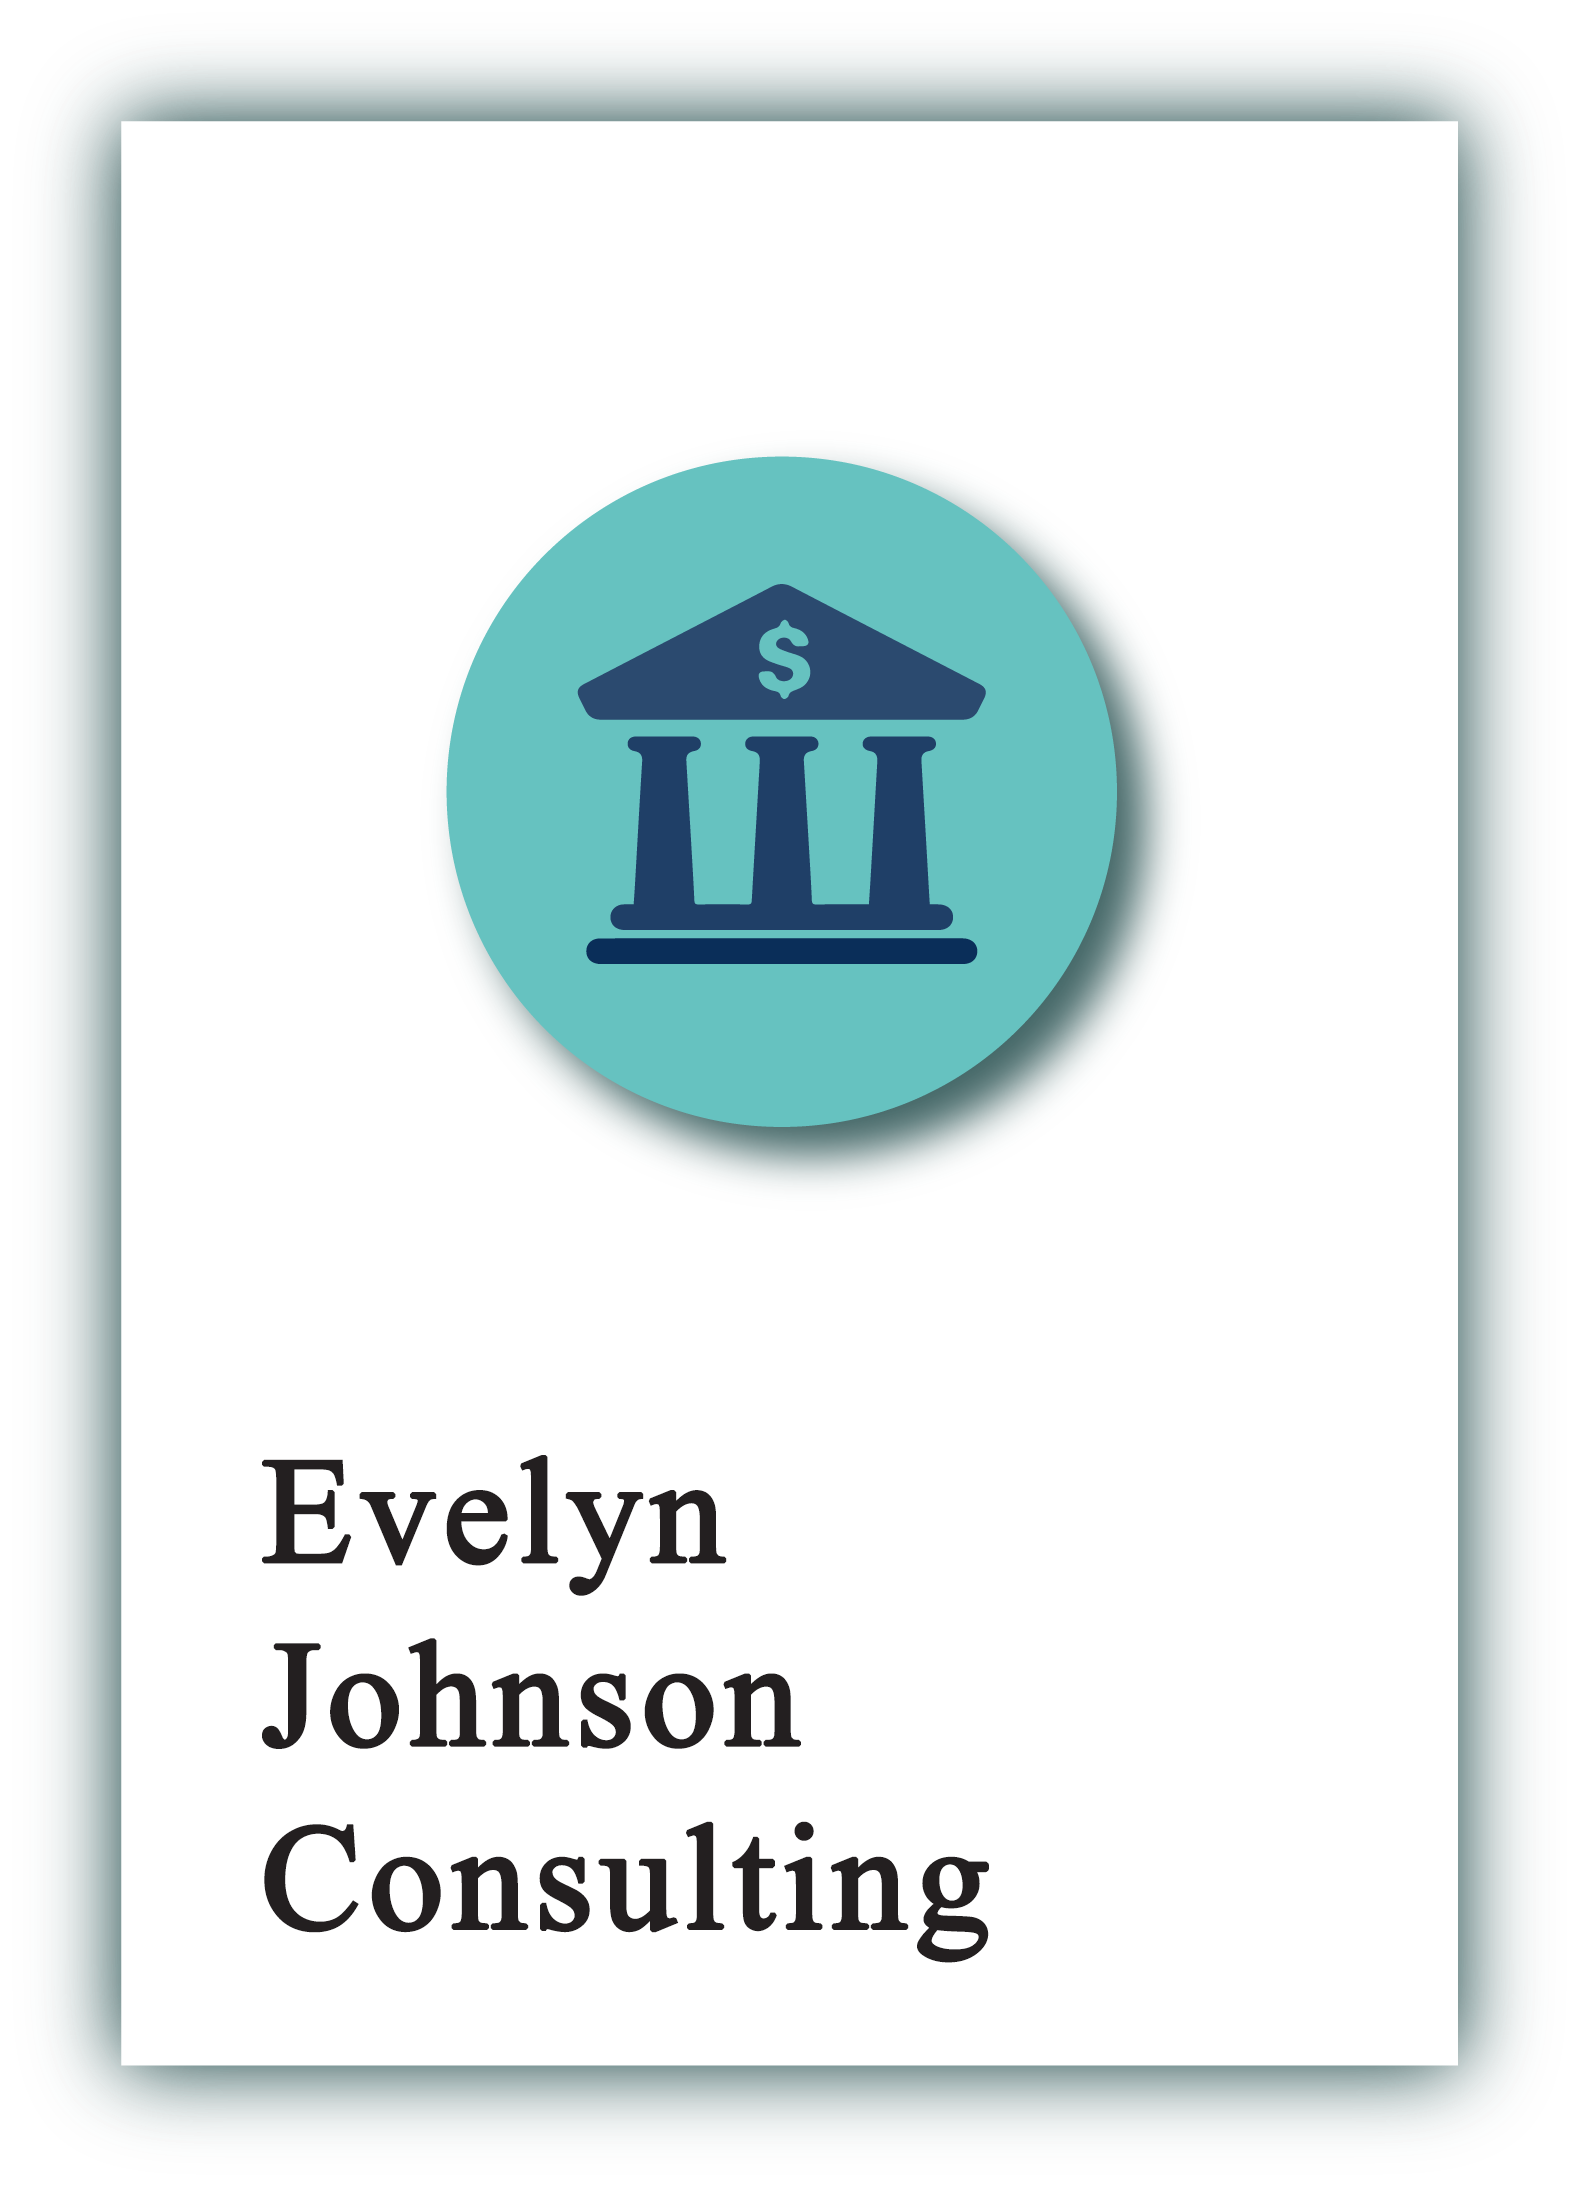 Evelyn Johnson Consulting